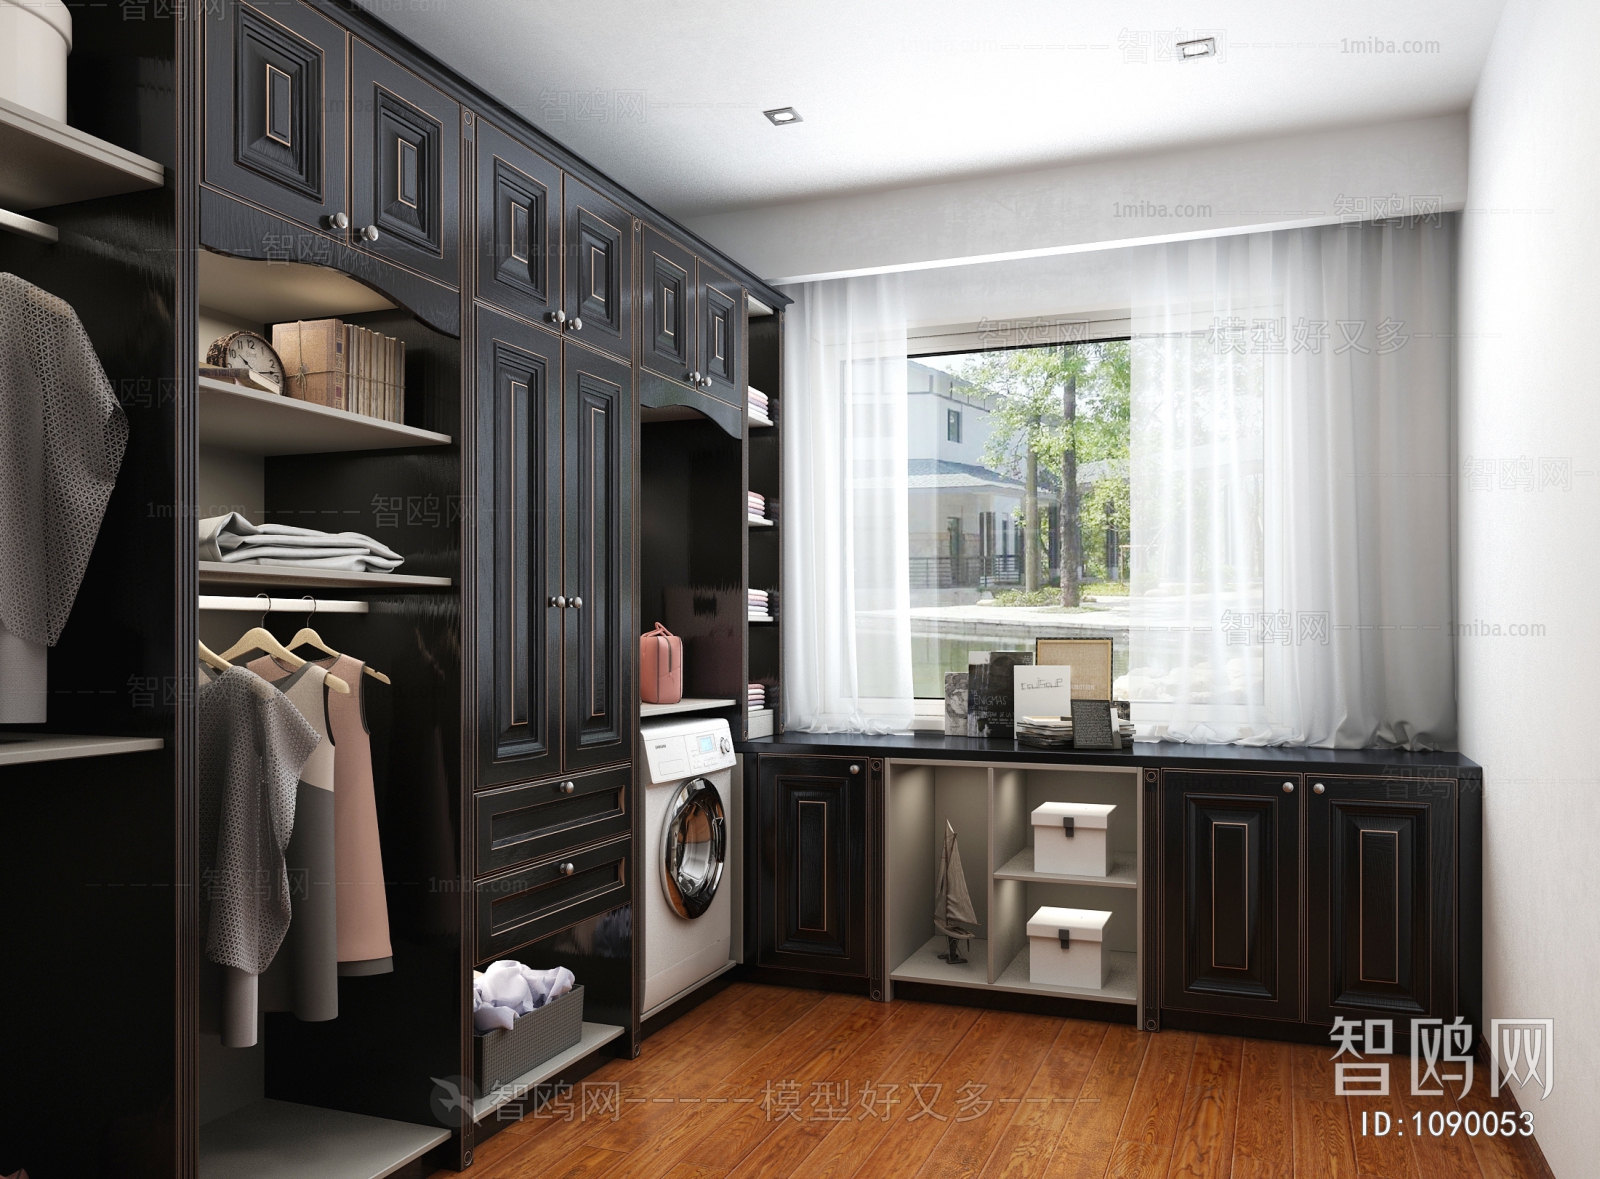 American Style Clothes Storage Area